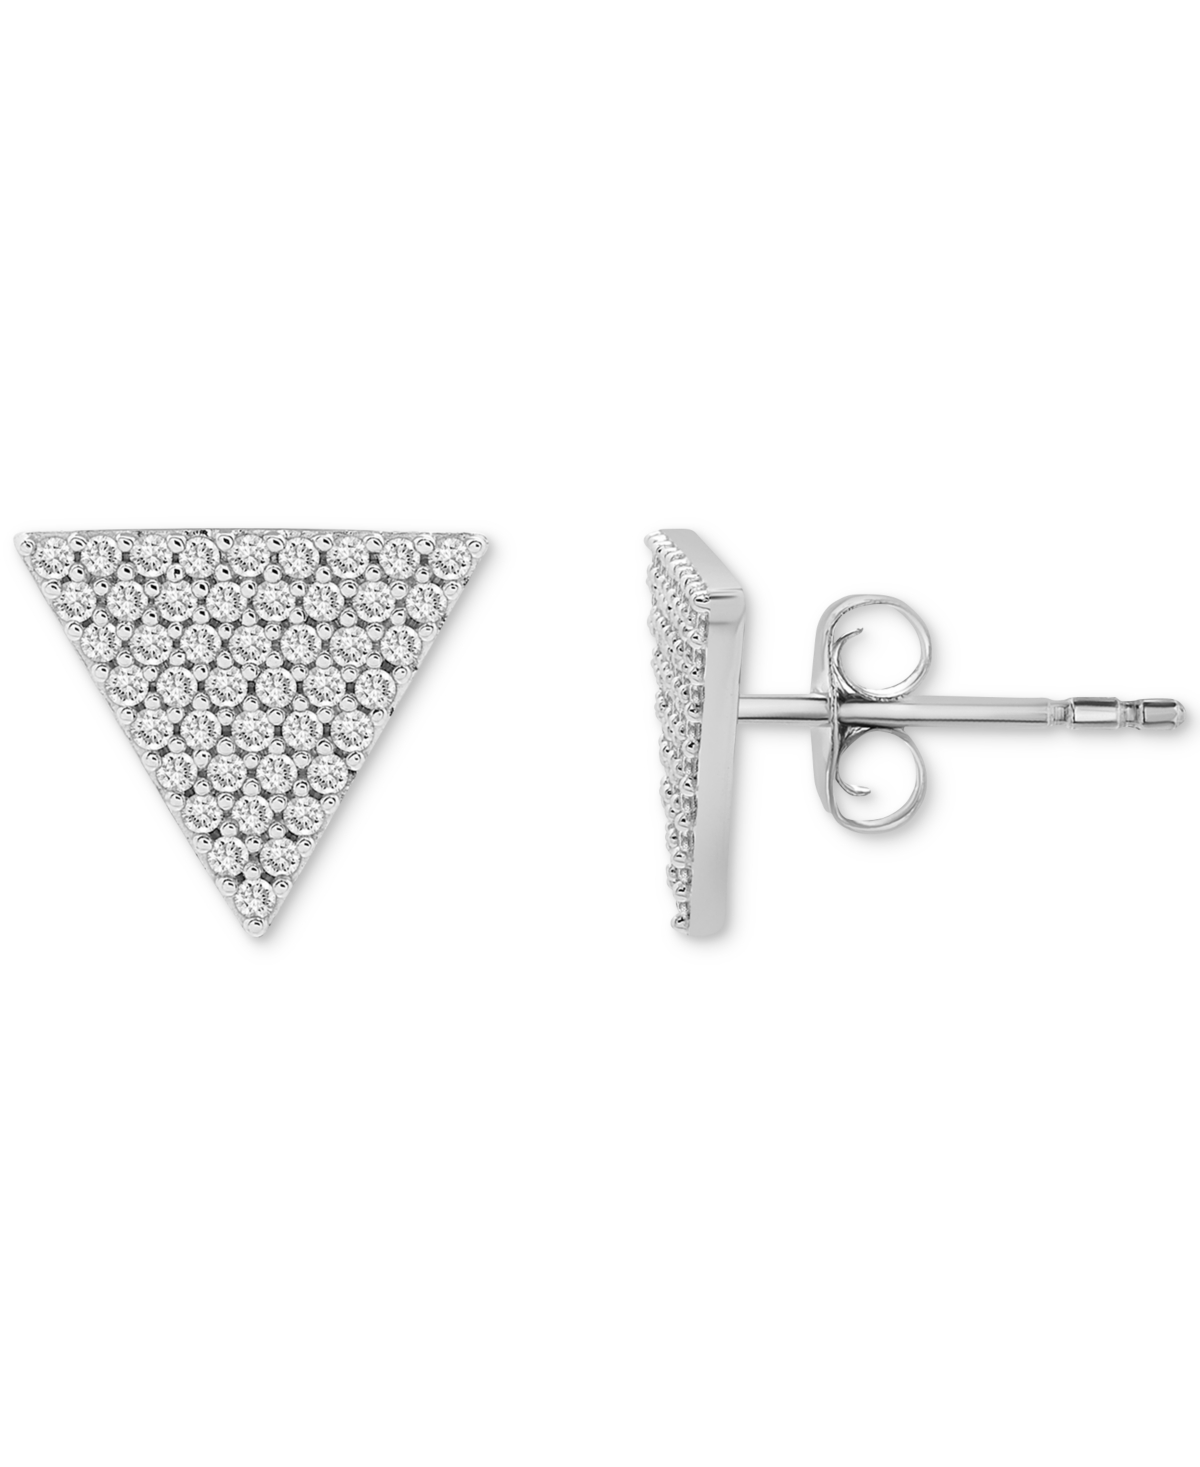 Diamond Triangle Stud Earrings (1/4 ct. tw) in 14k White Gold, Created for Macy's - White Gold